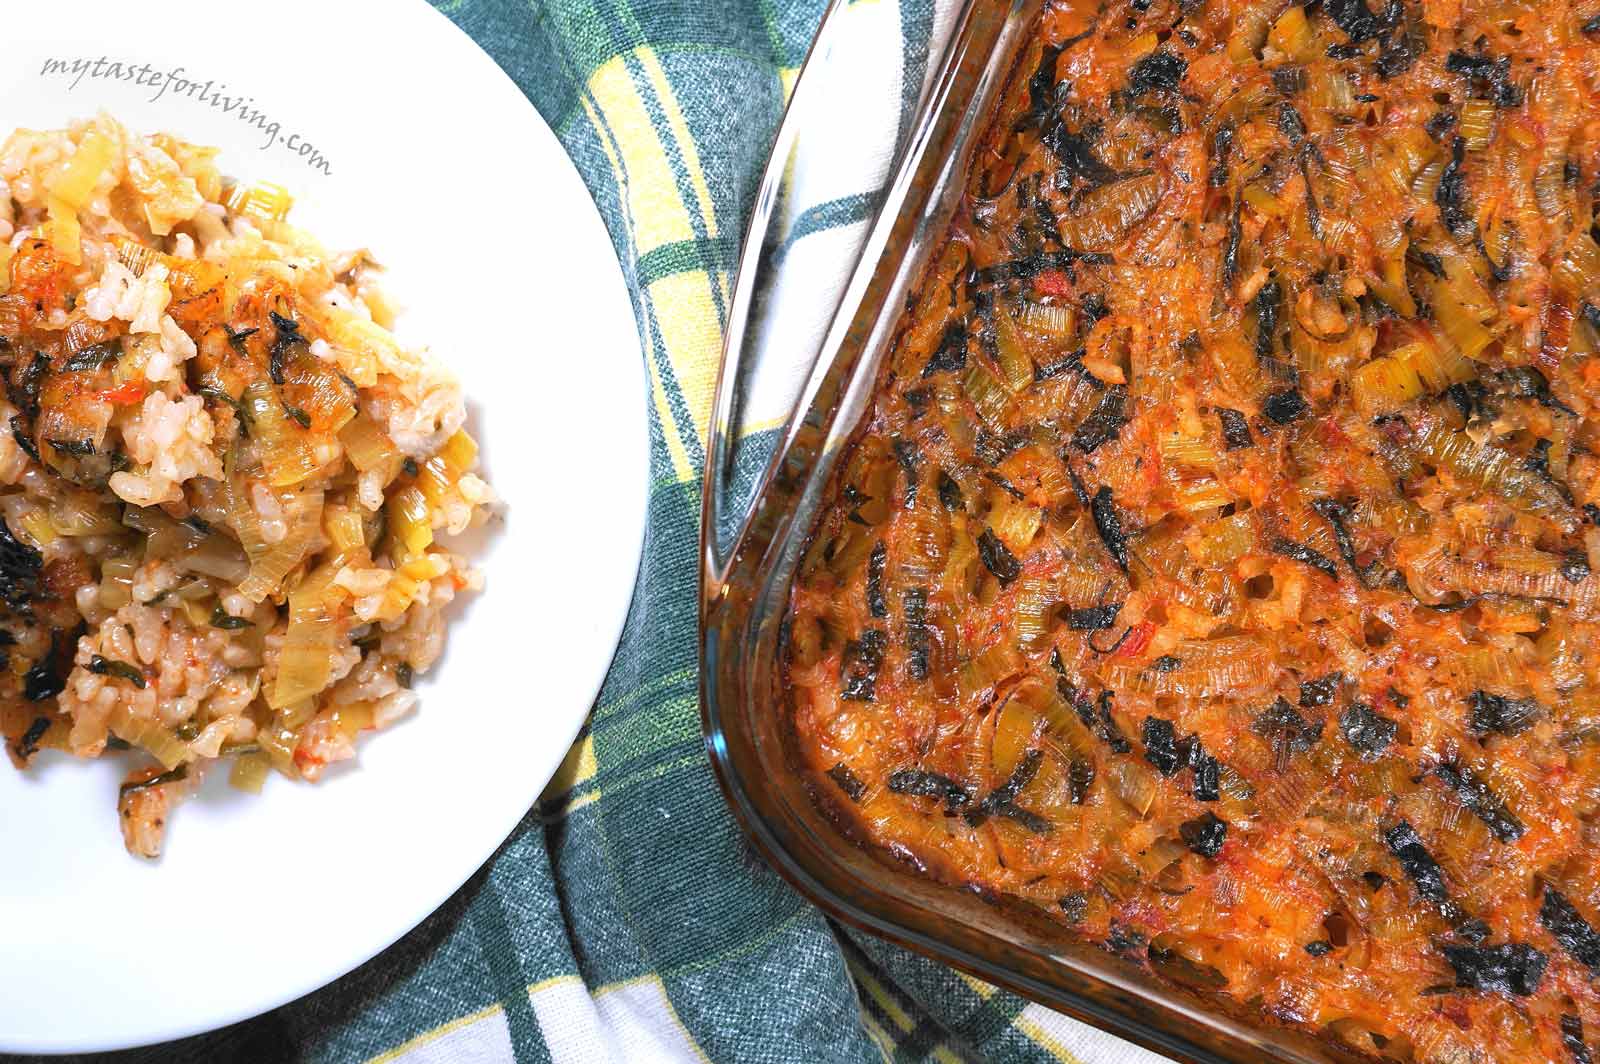 It's spring! Once the dock has sprouted in the garden, I must make this recipe - baked rice with leeks, tomatoes and dock. You can replace the dock with spinach, you can also use a larger amount than indicated in the recipe according to your taste.